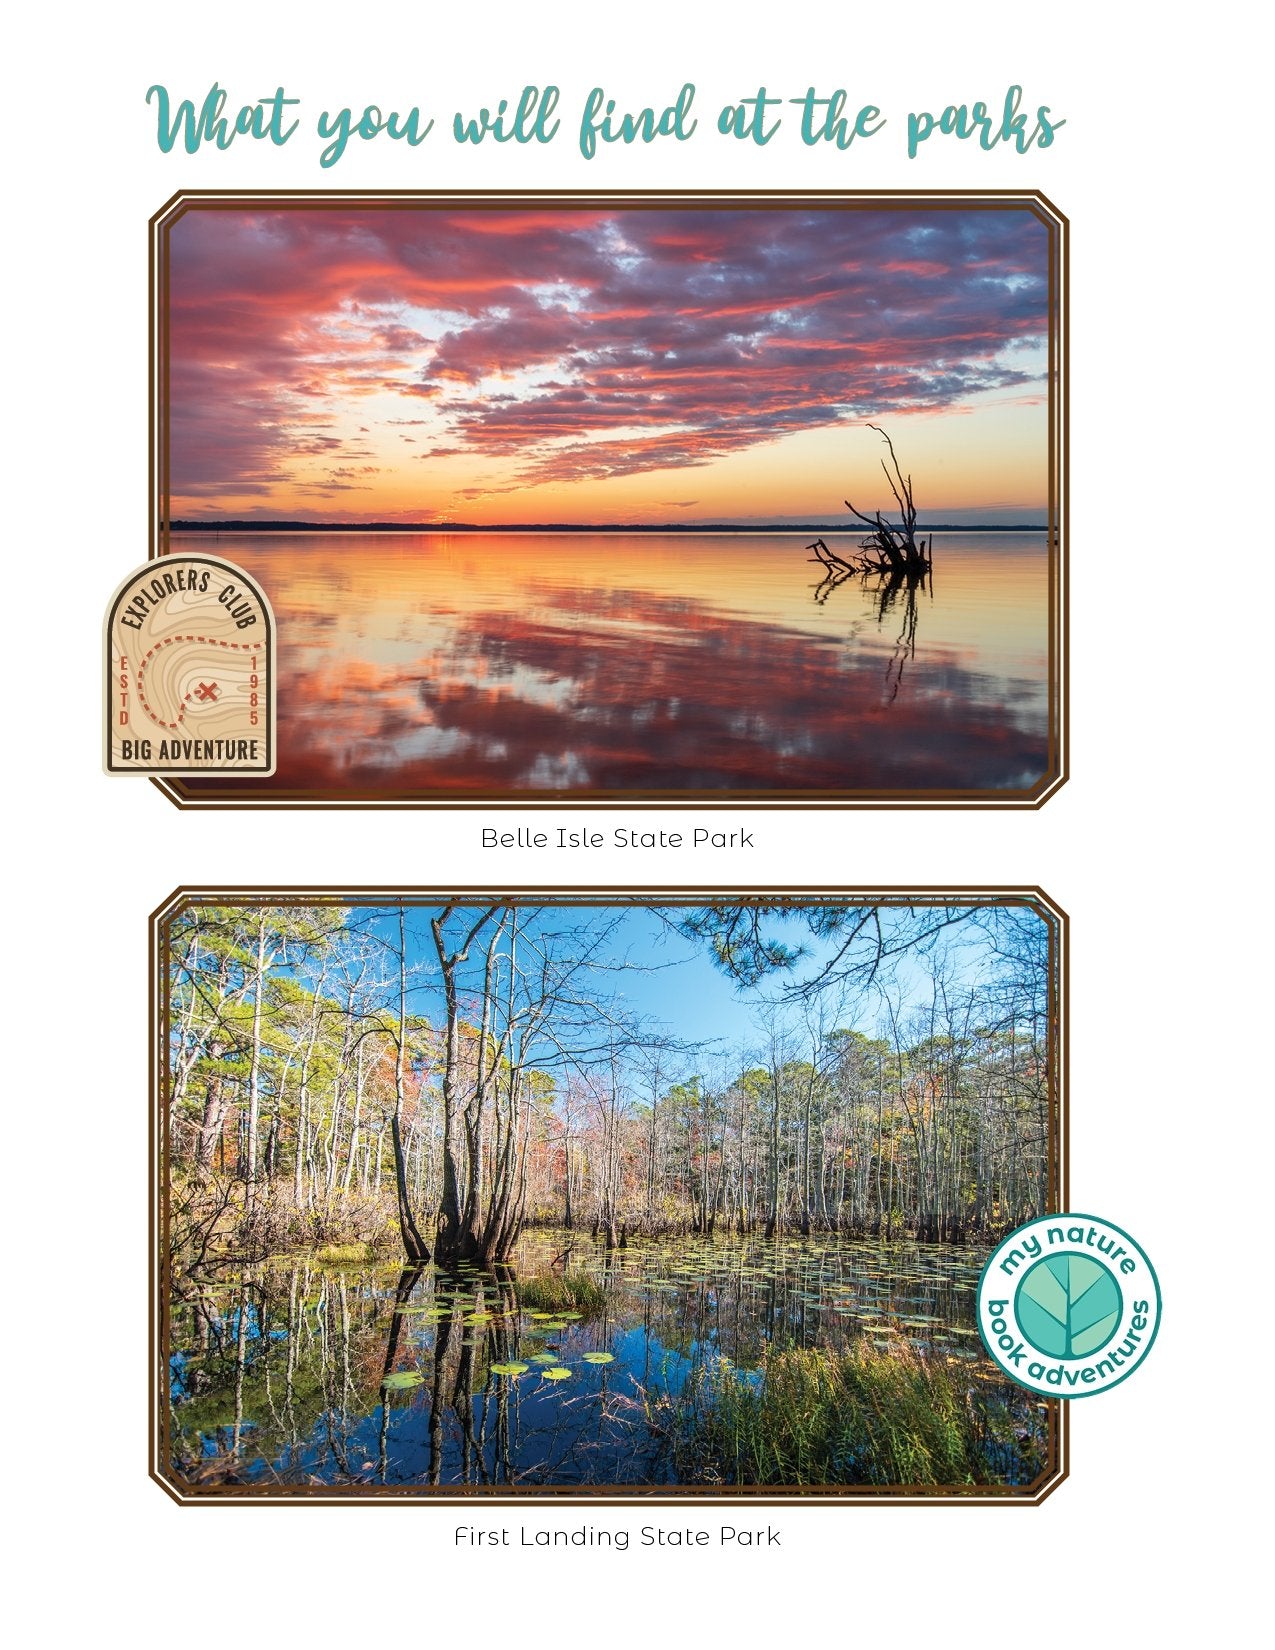 Virginia Parks - Adventure Planning Journal - 7th Edition - My Nature Book Adventures